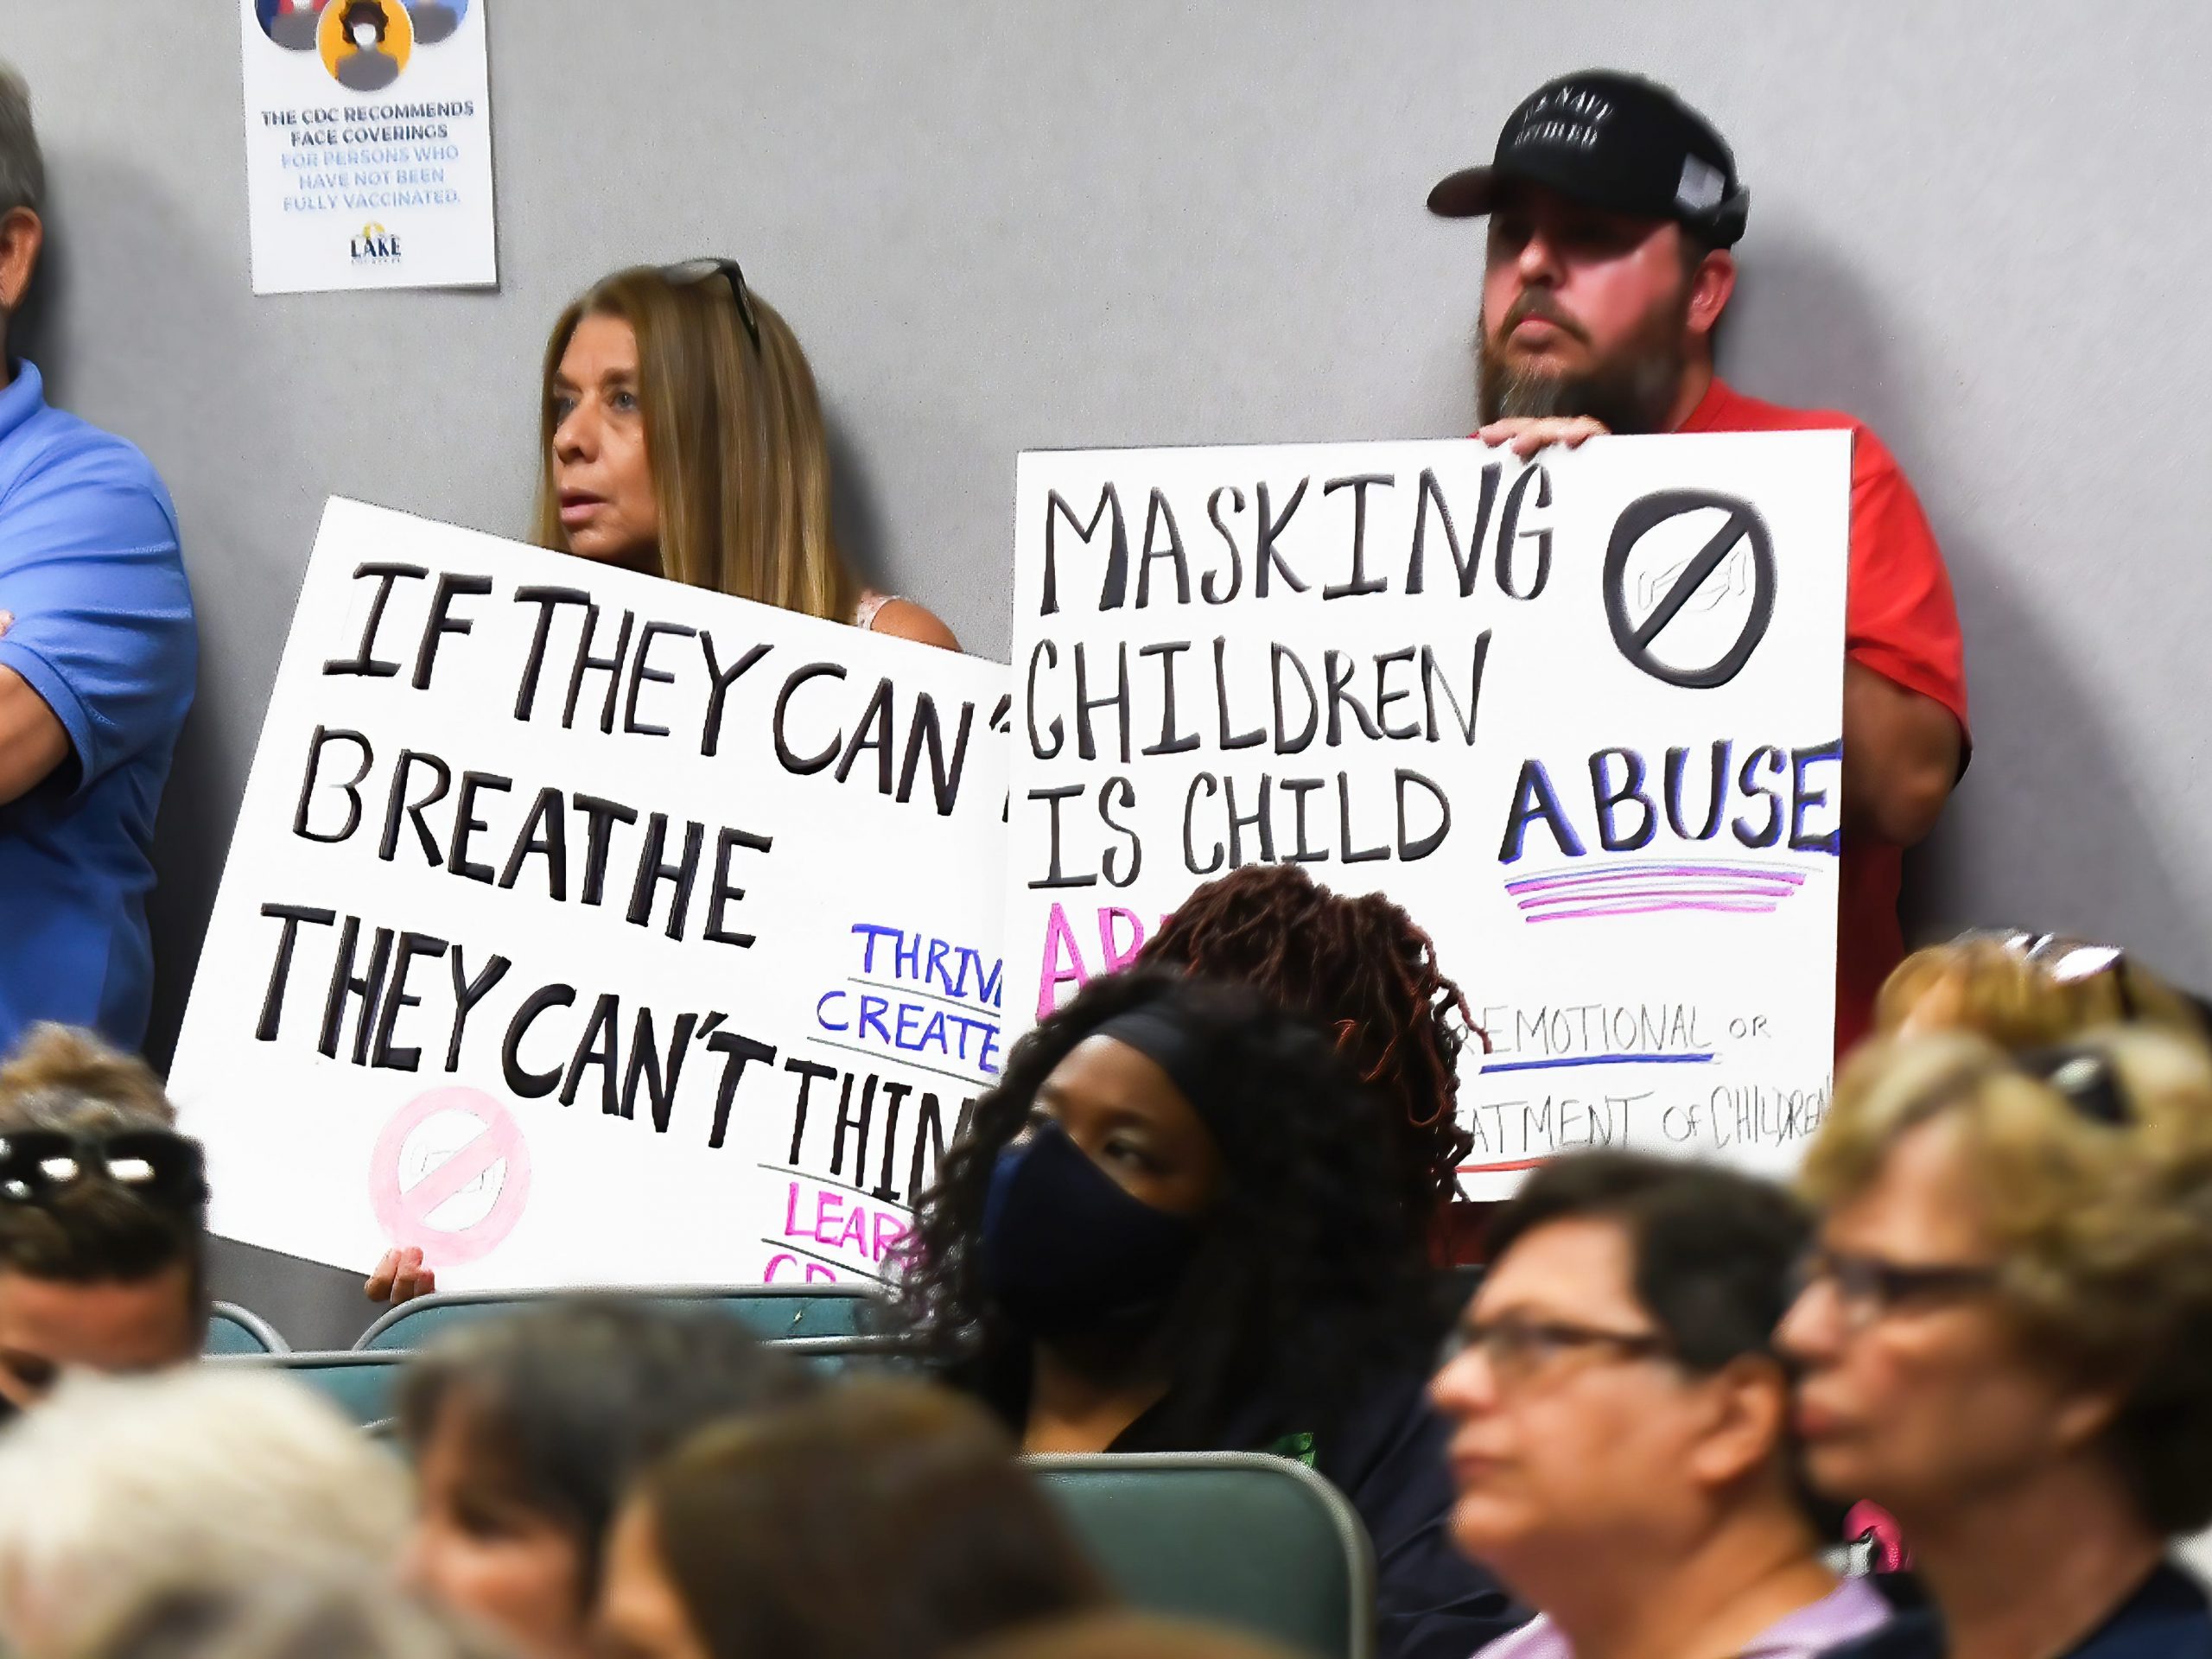 People demonstrate with placards at a special meeting of the Lake County, Florida School Board in Tavares to discuss whether face masks should be mandatory in local schools, September 02, 2021.